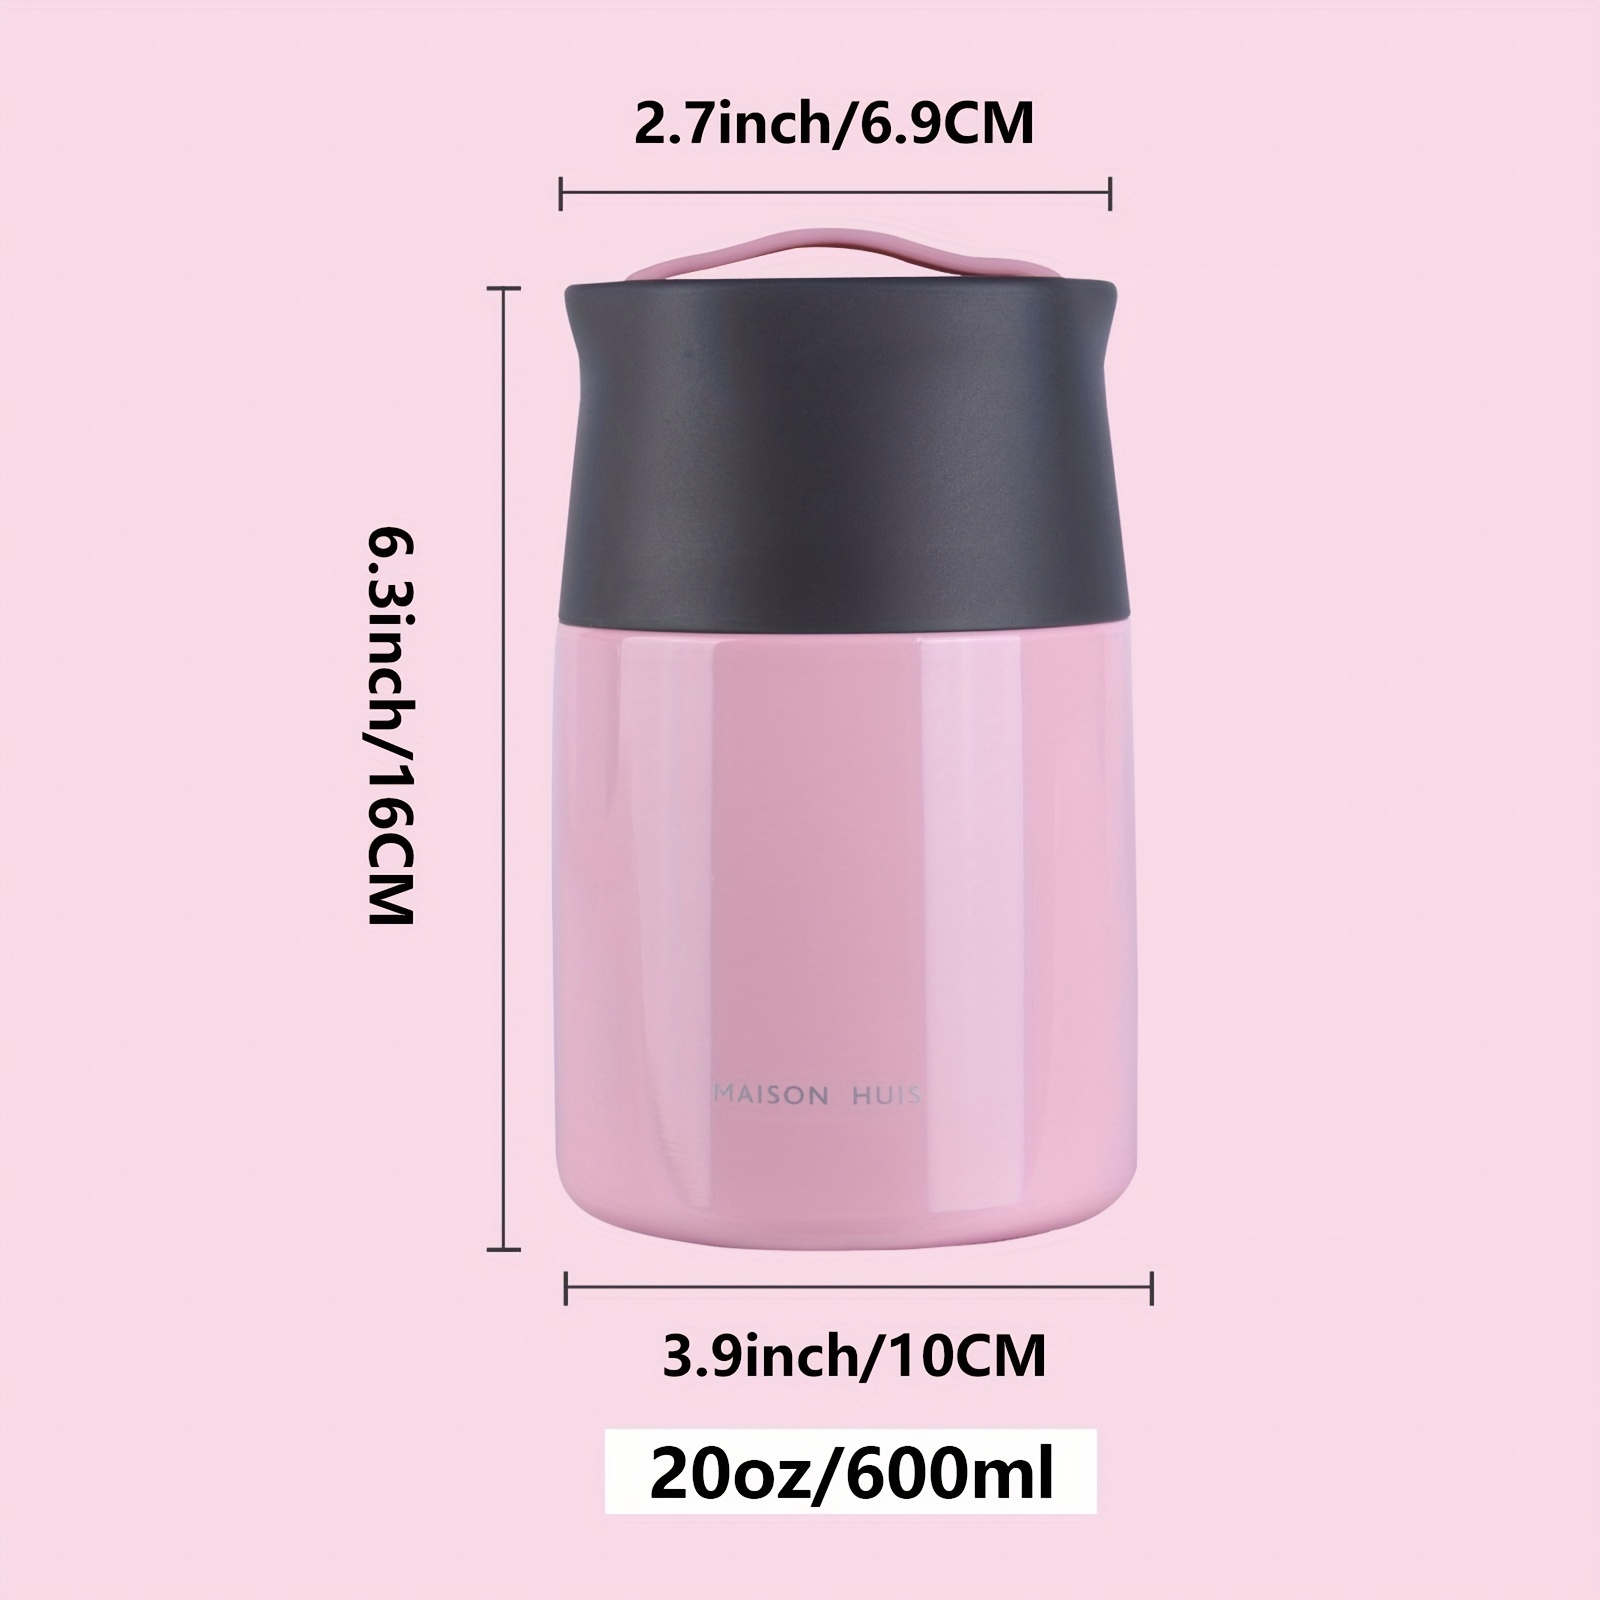 20oz/600ml Stainless Steel Vacuum Insulated Lunch Container - Leakproof,  Thermal, and Perfect for Kids and Adults!